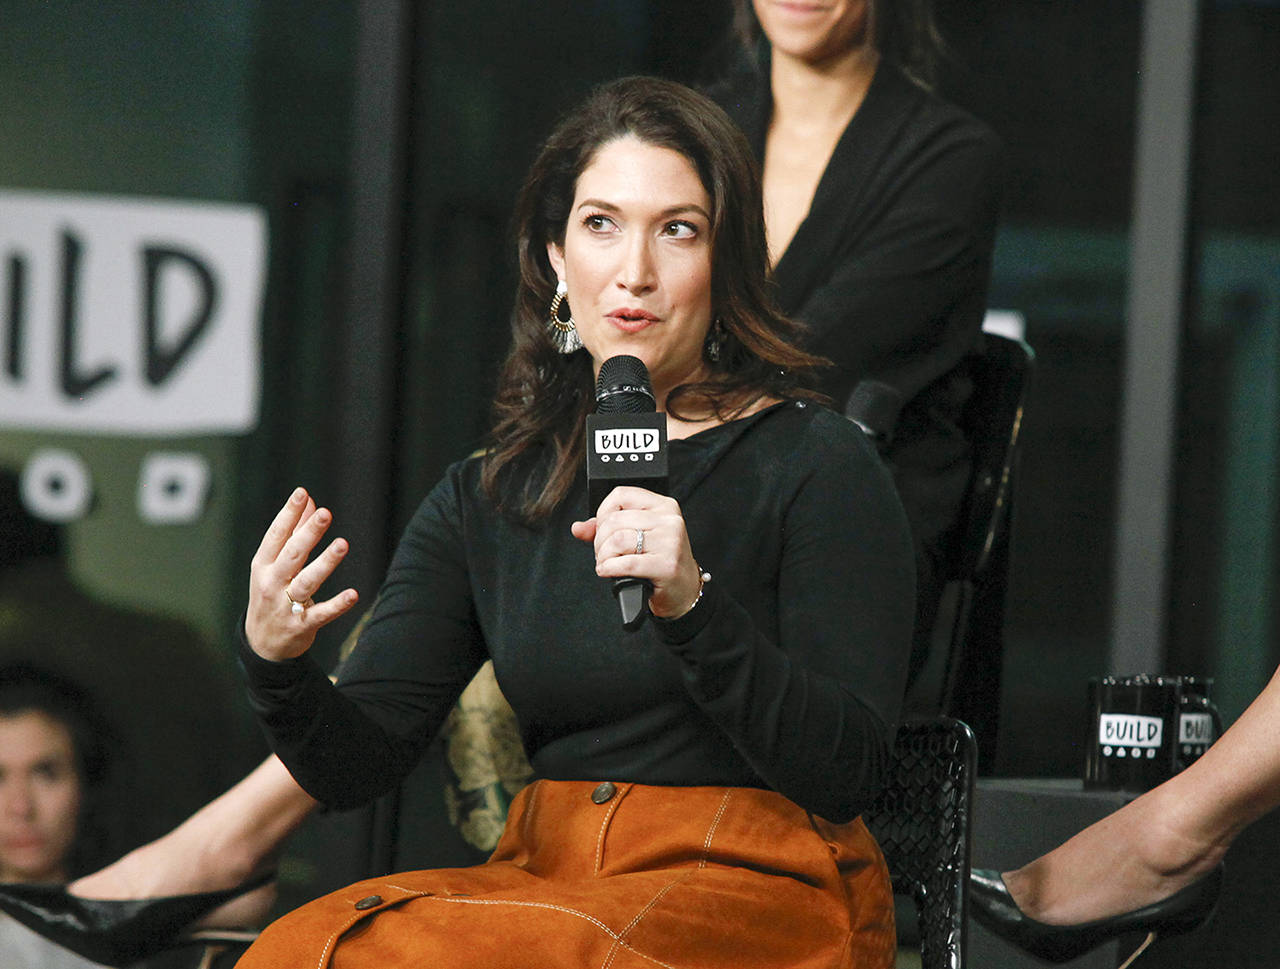 In this Oct. 17 photo, Randi Zuckerberg, sister of Facebook founder Mark Zuckerberg, participates in the BUILD Speaker Series Be Fierce tech panel in New York. (Photo by Andy Kropa/Invision/AP, File)